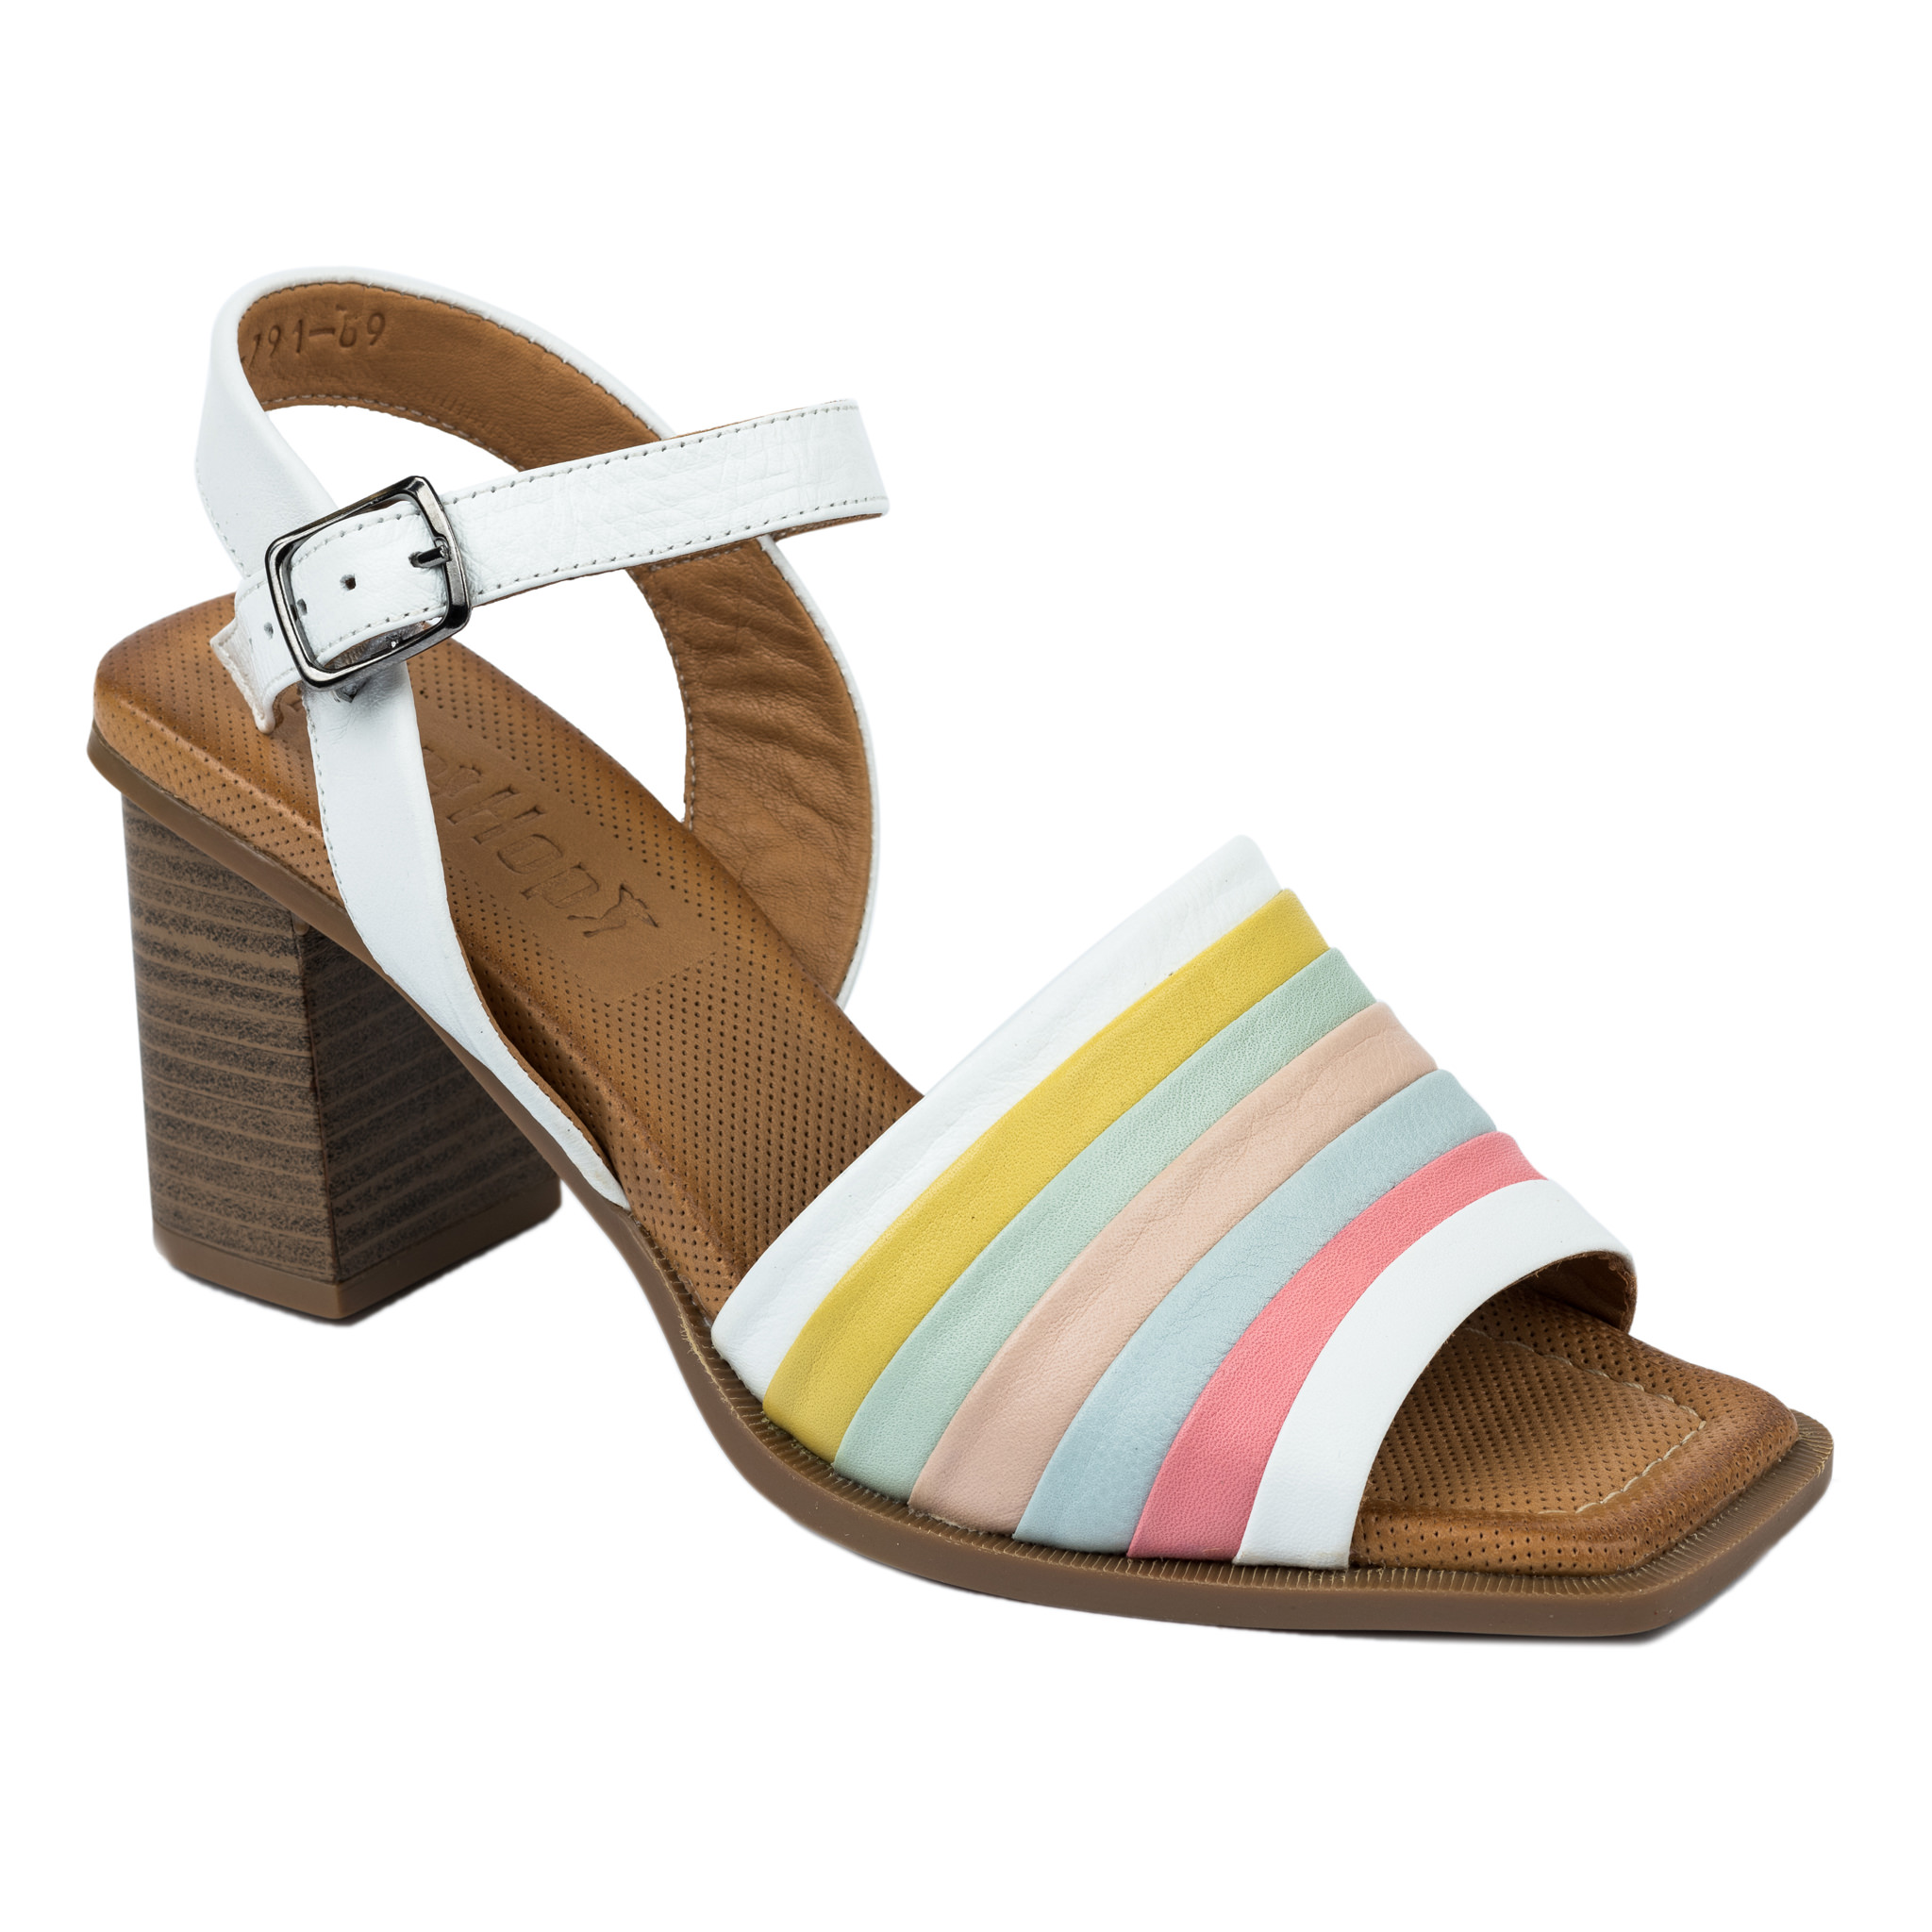 Leather sandals A678 - WHITE